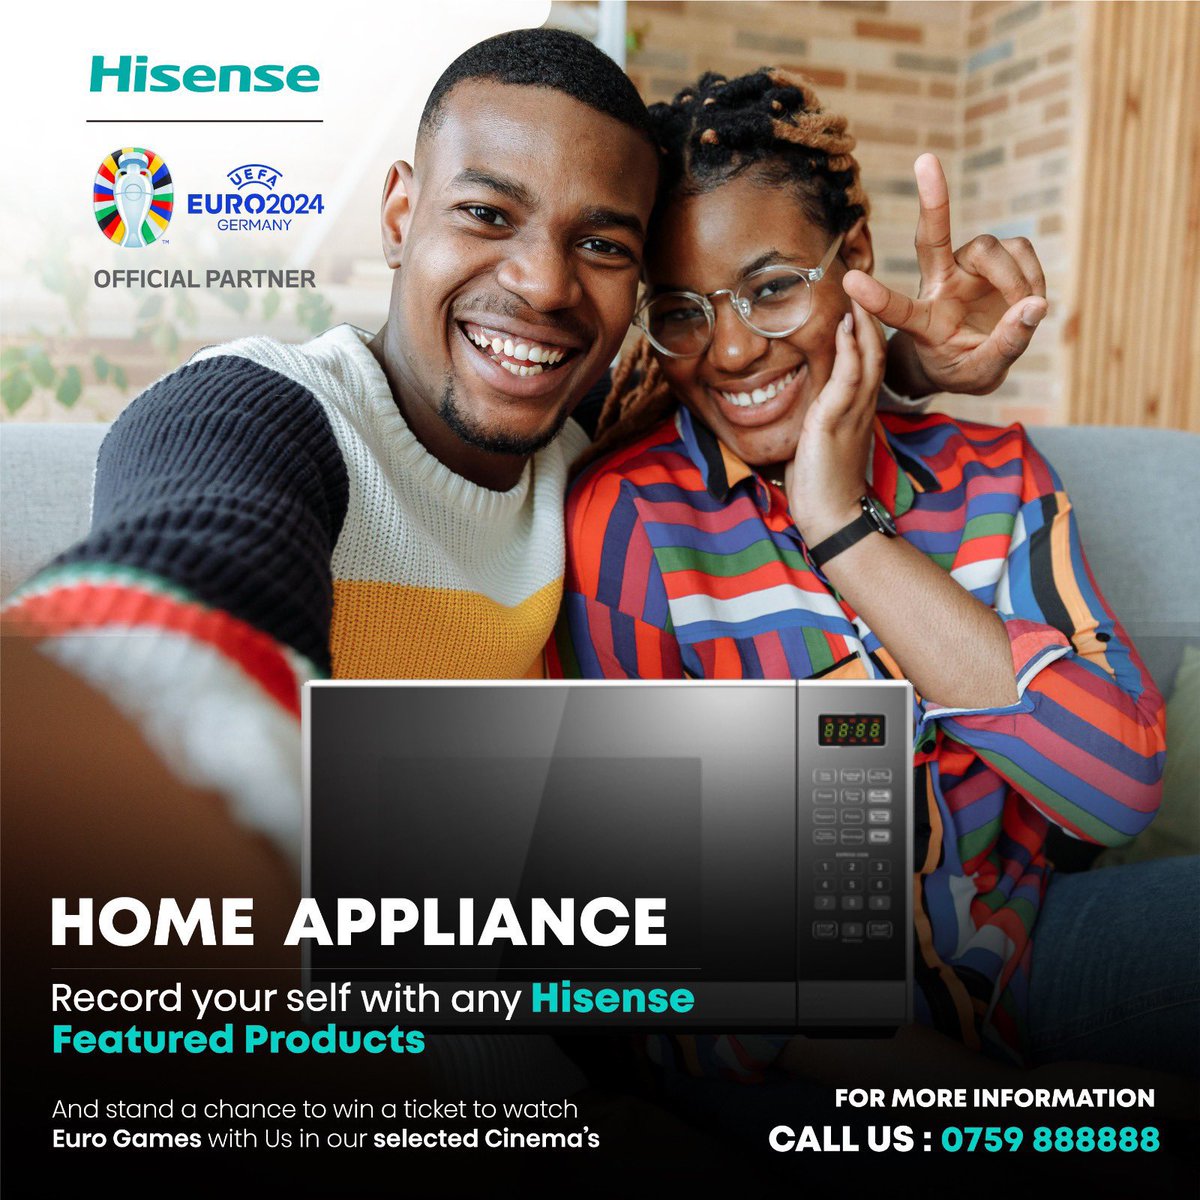 How are you preparing for the Euro 2024 games? Show us by recording yourself with any Hisense appliances and stand a chance to win goodies #HisenseEuroChallenge #EURO2024